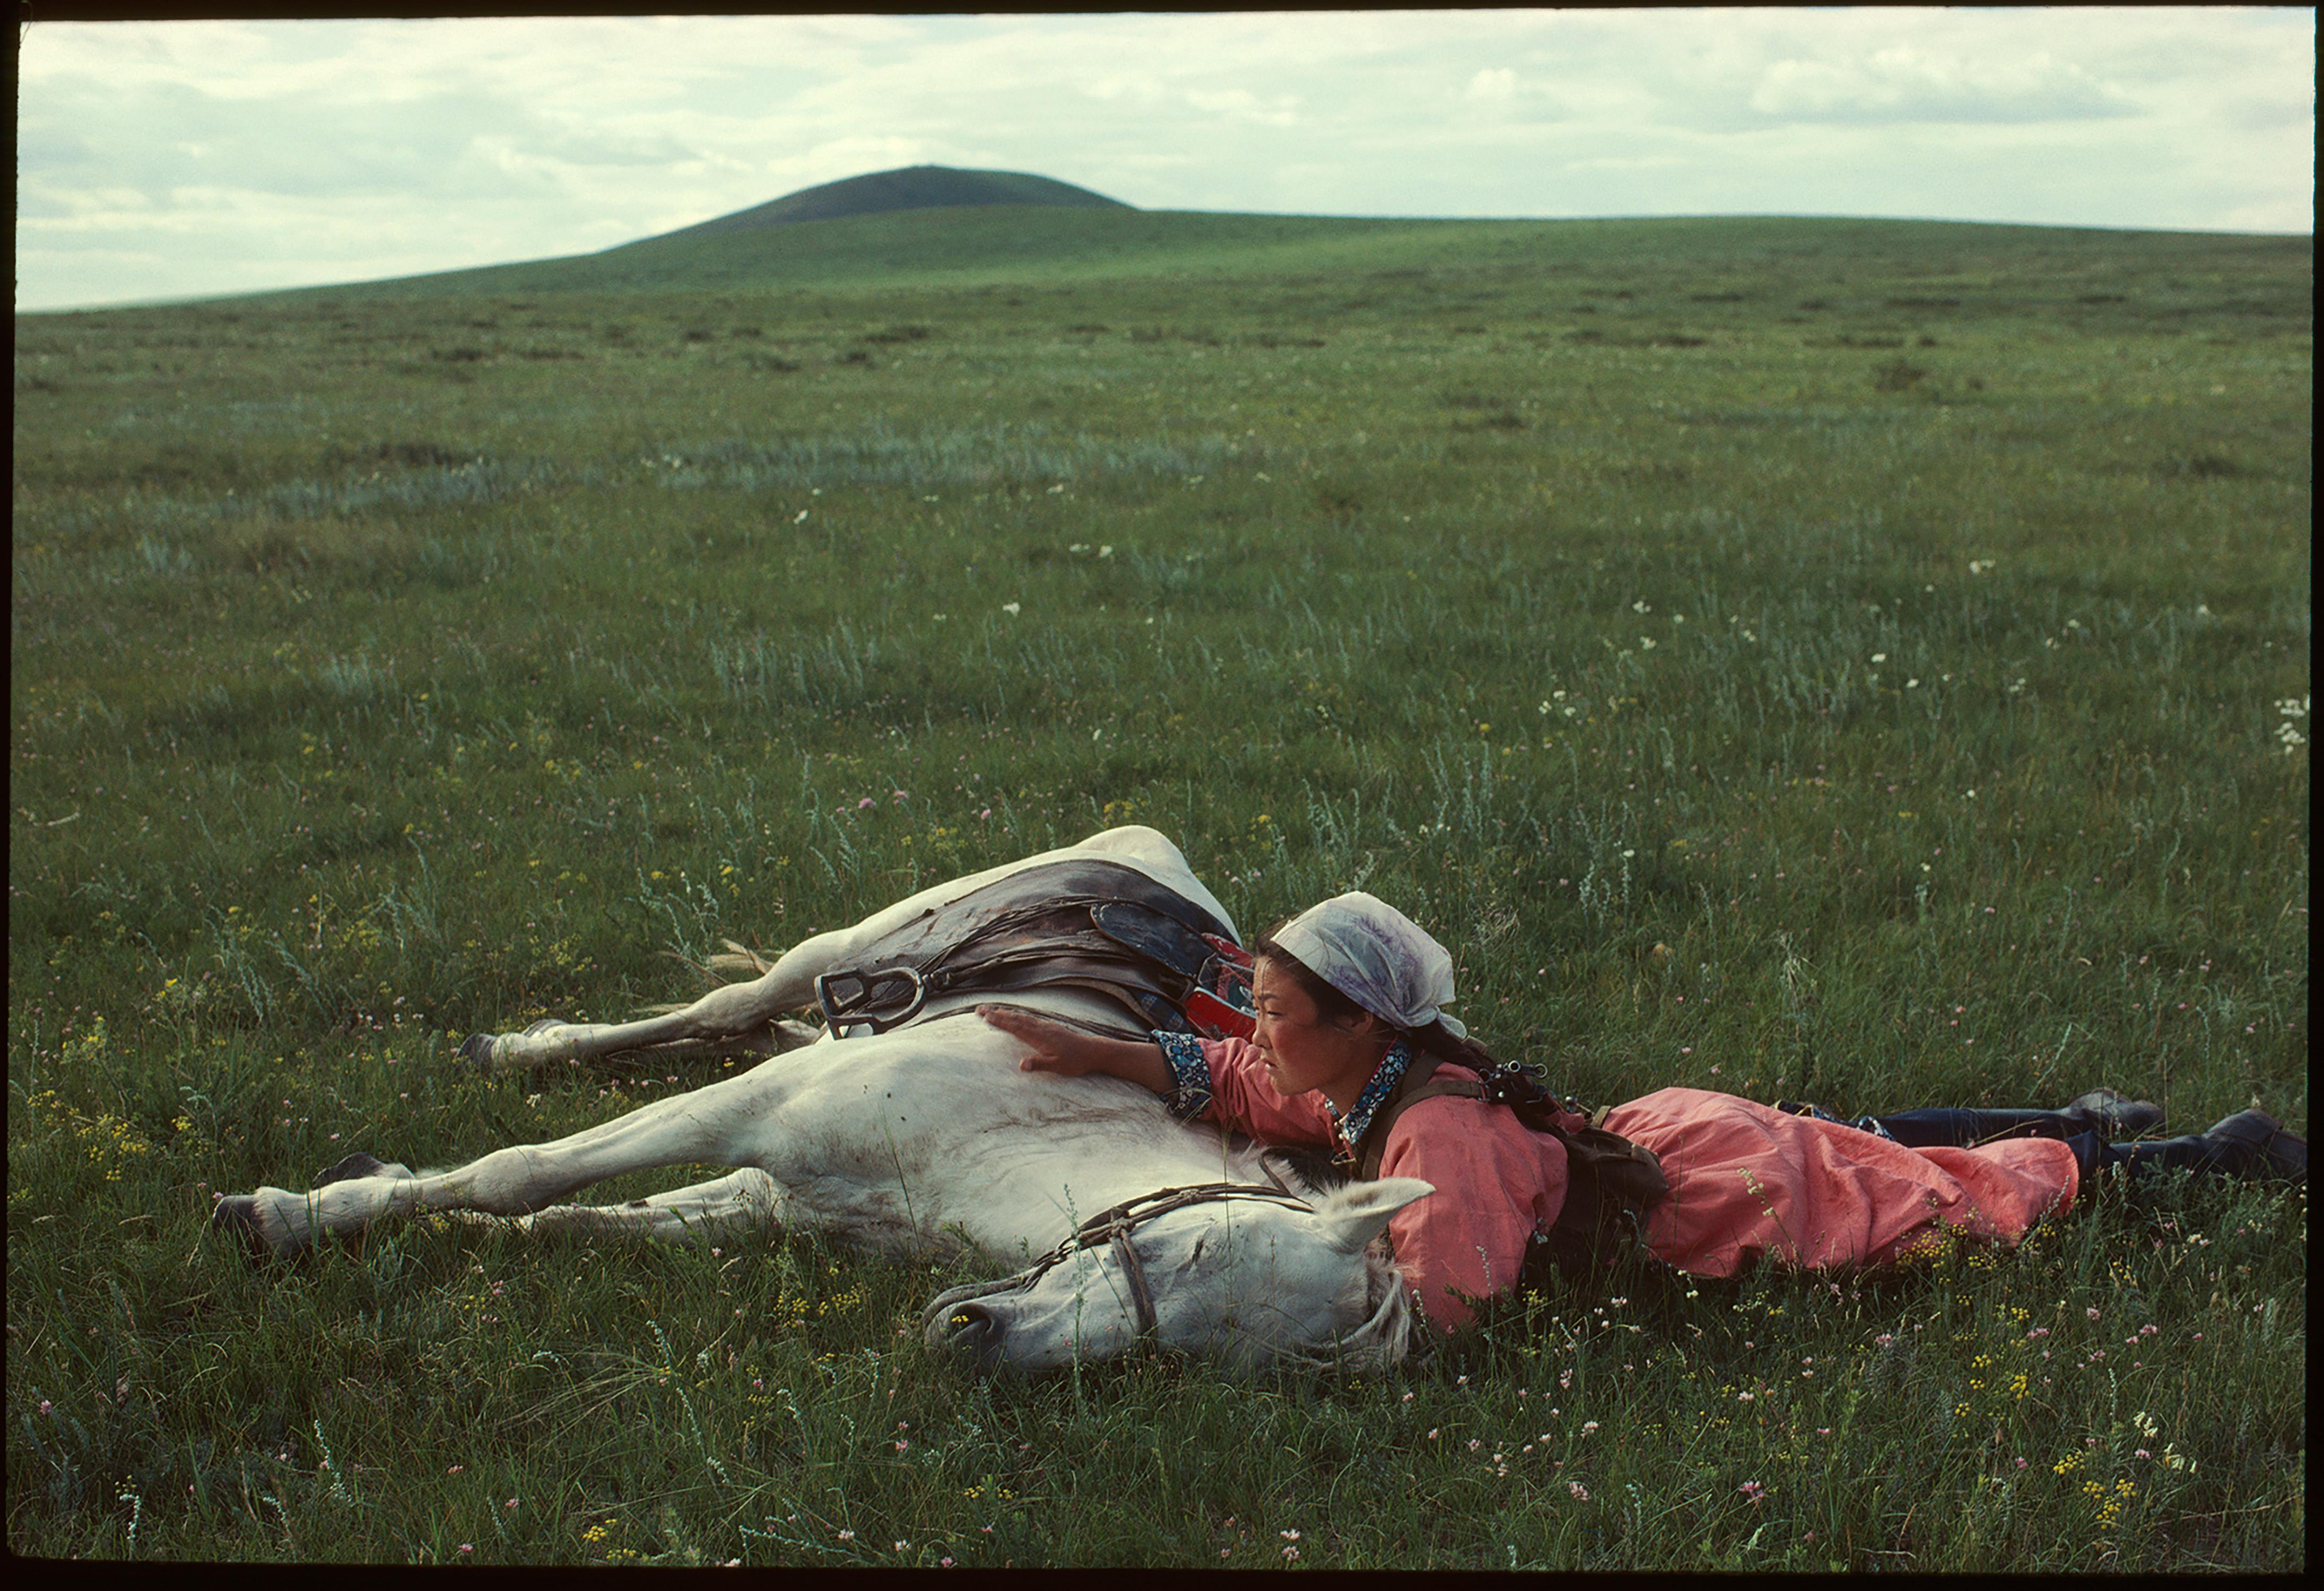 Eve Arnold - A Woman Trains a Horse, Photography 1979, Printed After